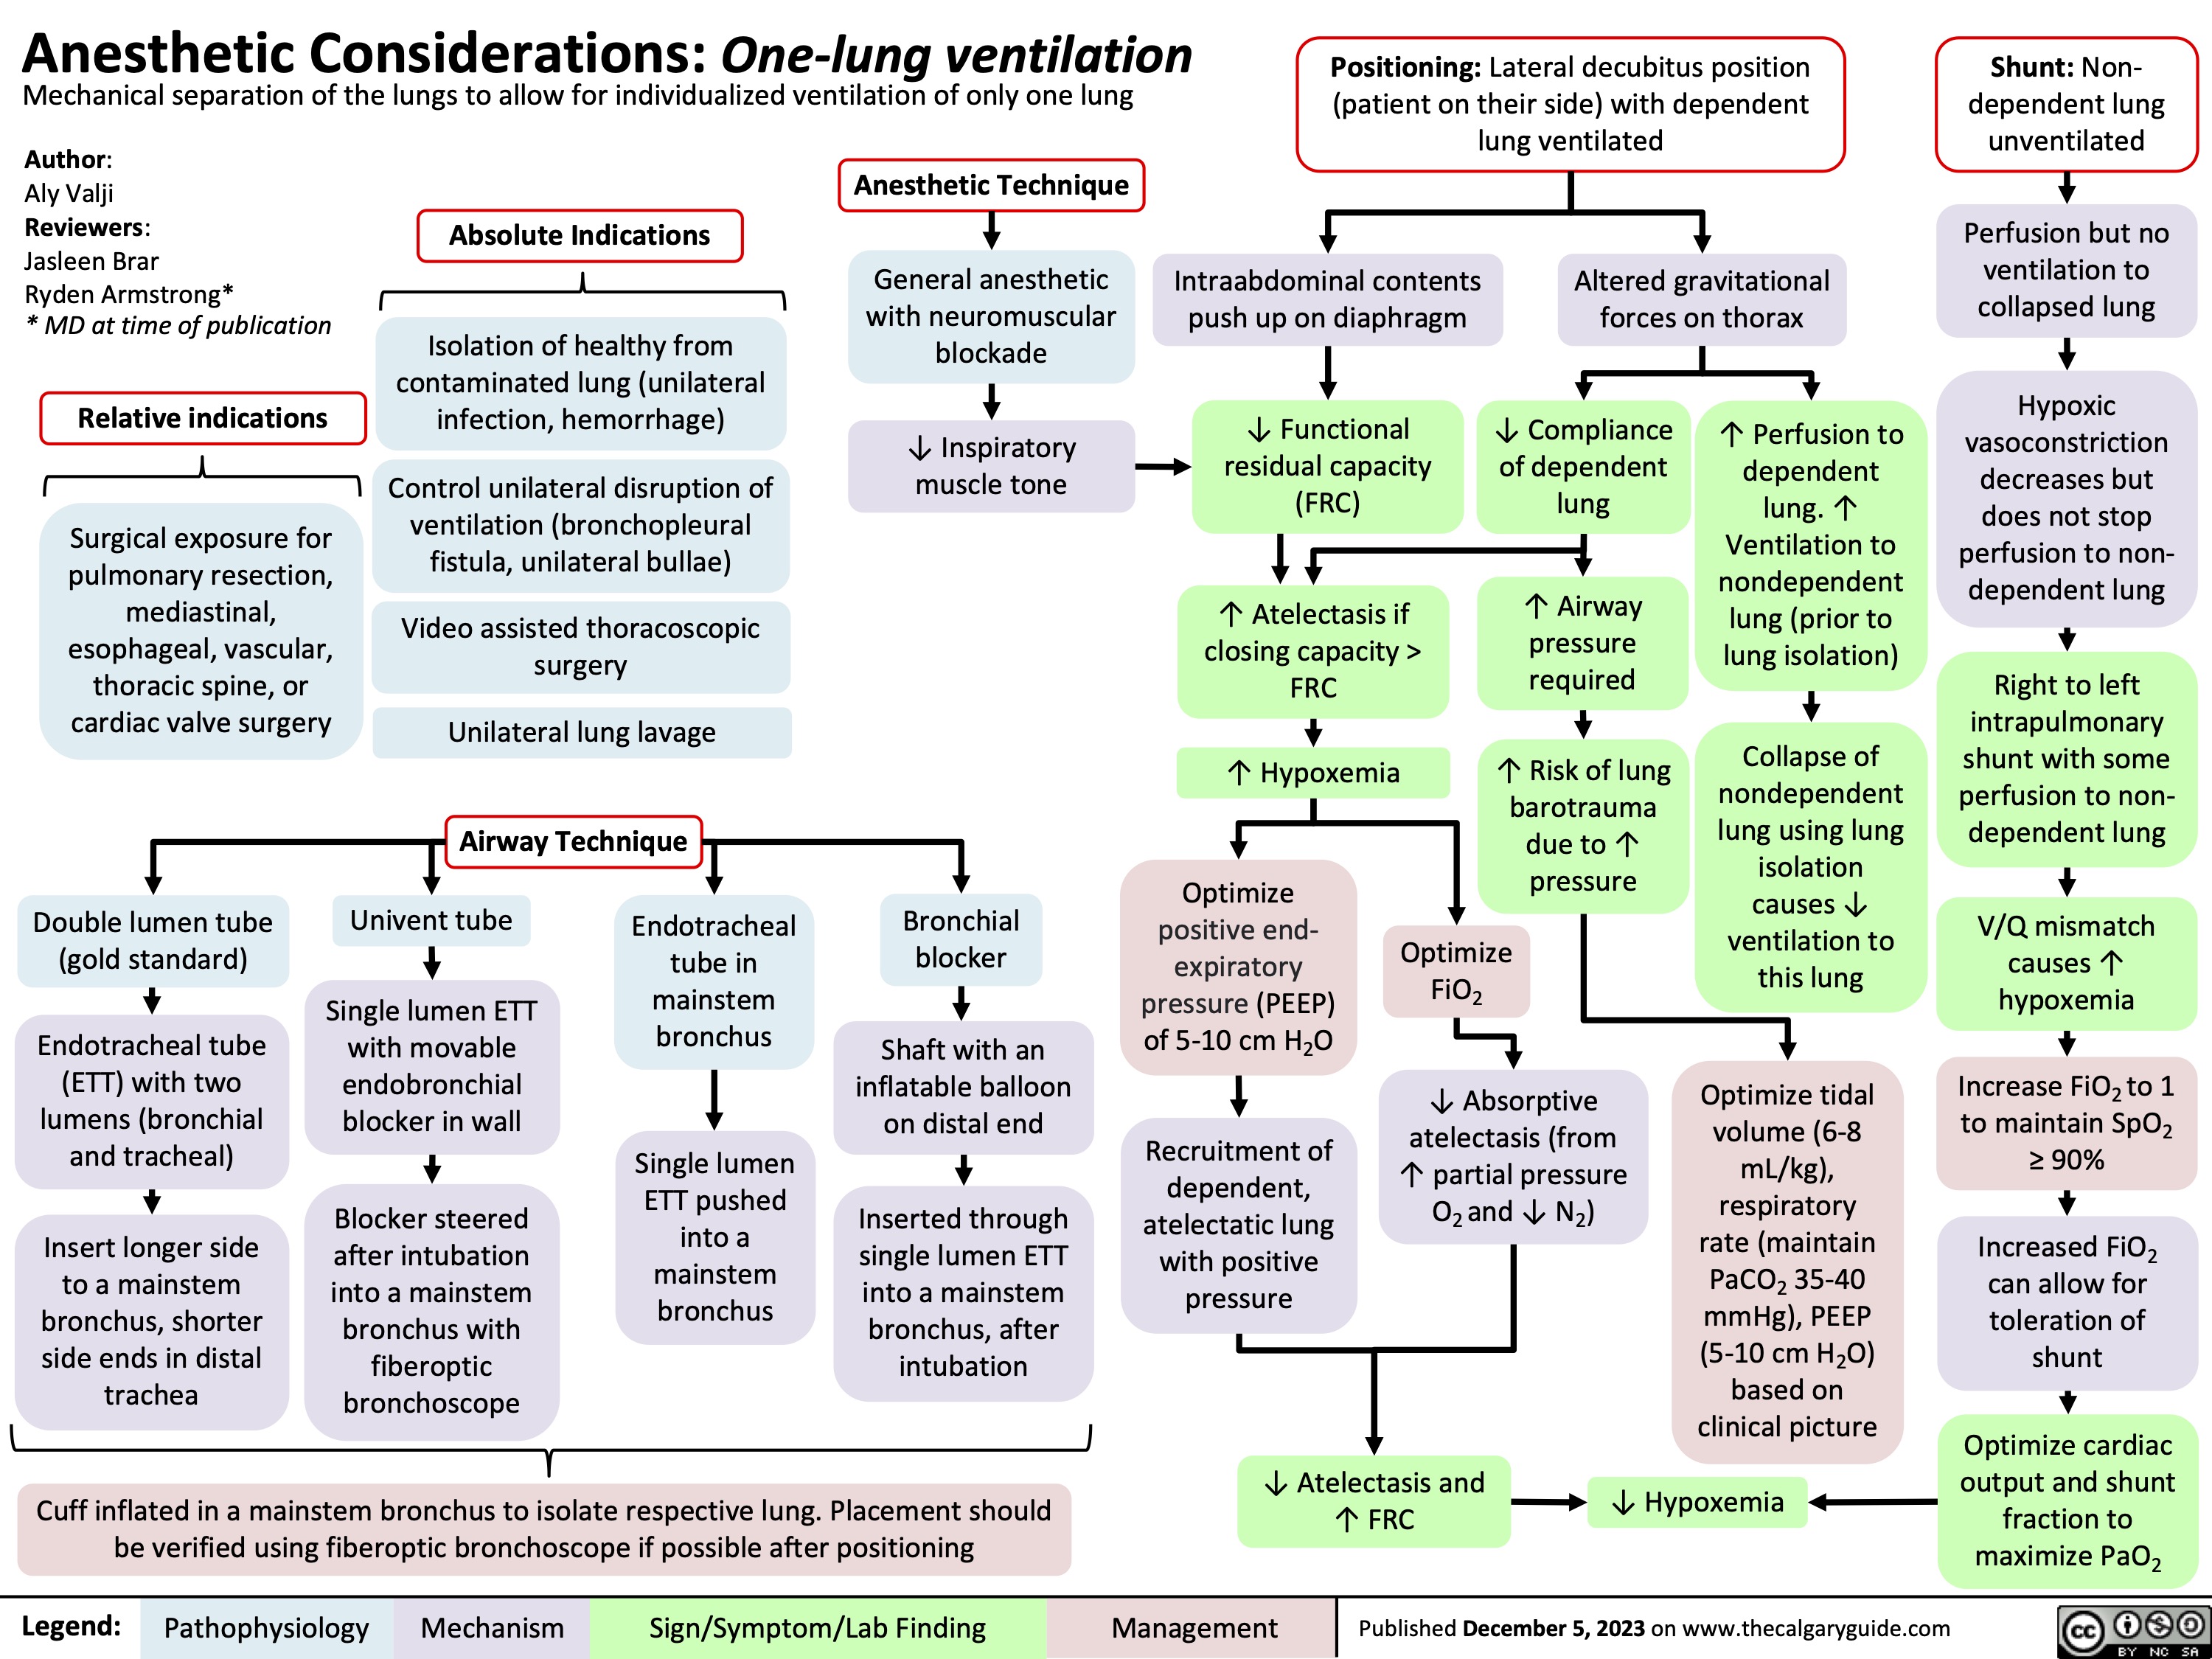 Anesthetic Considerations: One-lung ventilation Mechanical separation of the lungs to allow for individualized ventilation of only one lung
Positioning: Lateral decubitus position (patient on their side) with dependent lung ventilated
Shunt: Non- dependent lung unventilated
Perfusion but no ventilation to collapsed lung
Hypoxic vasoconstriction decreases but does not stop perfusion to non- dependent lung
Right to left intrapulmonary shunt with some perfusion to non- dependent lung
V/Q mismatch causes ↑ hypoxemia
Increase FiO2 to 1 to maintain SpO2 ≥ 90%
Increased FiO2 can allow for toleration of shunt
Optimize cardiac output and shunt fraction to maximize PaO2
  Author:
Aly Valji
Reviewers:
Jasleen Brar
Ryden Armstrong*
* MD at time of publication
Relative indications
Surgical exposure for pulmonary resection, mediastinal, esophageal, vascular, thoracic spine, or cardiac valve surgery
Double lumen tube (gold standard)
Endotracheal tube (ETT) with two lumens (bronchial and tracheal)
Insert longer side to a mainstem bronchus, shorter side ends in distal trachea
Absolute Indications
Isolation of healthy from contaminated lung (unilateral infection, hemorrhage)
Control unilateral disruption of ventilation (bronchopleural fistula, unilateral bullae)
Video assisted thoracoscopic surgery
Unilateral lung lavage
Airway Technique
Anesthetic Technique
General anesthetic with neuromuscular blockade
↓ Inspiratory muscle tone
Intraabdominal contents push up on diaphragm
↓ Functional residual capacity (FRC)
↑ Atelectasis if closing capacity > FRC
↑ Hypoxemia Optimize
Altered gravitational forces on thorax
               ↓ Compliance of dependent lung
↑ Airway pressure required
↑ Risk of lung barotrauma due to ↑ pressure
↑ Perfusion to dependent lung. ↑ Ventilation to nondependent lung (prior to lung isolation)
Collapse of nondependent lung using lung isolation causes ↓ ventilation to this lung
Optimize tidal volume (6-8 mL/kg), respiratory rate (maintain PaCO2 35-40 mmHg), PEEP (5-10 cm H2O) based on clinical picture
                       Univent tube
Single lumen ETT with movable endobronchial blocker in wall
Blocker steered after intubation into a mainstem bronchus with fiberoptic bronchoscope
Endotracheal tube in mainstem bronchus
Single lumen ETT pushed into a mainstem bronchus
Bronchial blocker
Shaft with an inflatable balloon on distal end
Inserted through single lumen ETT into a mainstem bronchus, after intubation
positive end- expiratory pressure (PEEP) of 5-10 cm H2O
Recruitment of dependent, atelectatic lung with positive pressure
Optimize FiO2
↓ Absorptive atelectasis (from ↑ partial pressure O2 and ↓ N2)
                    Cuff inflated in a mainstem bronchus to isolate respective lung. Placement should be verified using fiberoptic bronchoscope if possible after positioning
↓ Atelectasis and ↑ FRC
↓ Hypoxemia
  Legend:
 Pathophysiology
 Mechanism
 Sign/Symptom/Lab Finding
 Management
 Published December 5, 2023 on www.thecalgaryguide.com
 
Anesthetic Considerations: One-lung ventilation Mechanical separation of the lungs to allow for individualized ventilation of only one lung
Positioning: Lateral decubitus position (patient on their side) with dependent lung ventilated
Shunt: Non- dependent lung unventilated
Perfusion but no ventilation to collapsed lung
Hypoxic vasoconstriction decreases but does not stop perfusion to non- dependent lung
Right to left intrapulmonary shunt with some perfusion to non- dependent lung
V/Q mismatch from shunt causes ↑ hypoxemia
Increase FiO2 to 1 to maintain SpO2 ≥ 90%
Vasodilation of dependent lung vasculature to compensate for shunt to non- dependent lung
↓ V/Q mismatch
  Author:
Aly Valji
Reviewers:
Jasleen Brar
Dr. Armstrong*
* MD at time of publication
Relative indications
Surgical exposure for pulmonary resection, mediastinal, esophageal, vascular, thoracic spine, or cardiac valve surgery
Double lumen tube (DLT)
Two endotracheal tubes (ETT) bonded together
Insert longer side to a mainstem bronchus, shorter side ends in distal trachea
Absolute Indications
Isolation of healthy from contaminated lung (unilateral infection, hemorrhage)
Control unilateral disruption of ventilation (bronchopleural fistula, unilateral bullae)
Video assisted thoracoscopic surgery
Unilateral lung lavage
Airway Technique
Anesthetic Technique
General anesthetic with neuromuscular blockade
↓ Inspiratory muscle tone
Intraabdominal contents push up on diaphragm
↓ Functional residual capacity (FRC)
↑ Atelectasis if closing capacity > FRC
↑ Hypoxemia Optimize
Altered gravitational forces on thorax
               ↑ Elastance of dependent lung
↑ Airway pressure required
↑ Risk of lung barotrauma due to ↑ pressure
↑ Perfusion to dependent, ventilated lung
↓ Ventilation- perfusion (V/Q) mismatch
↓ Hypoxemia
Optimize tidal volume (6-8 mL/kg), respiratory rate (maintain PaCO2 35-40 mmHg), PEEP (5-10 cm H2O) based on clinical picture
                       Univent tube
Single lumen ETT with movable endobronchial blocker in wall
Blocker steered after intubation into a mainstem bronchus with fiberoptic bronchoscope
Endotracheal tube in mainstem bronchus
Single lumen ETT pushed into a mainstem bronchus
Bronchial blocker
Shaft with an inflatable balloon on distal end
Inserted through single lumen ETT into a mainstem bronchus, after intubation
positive end- expiratory pressure (PEEP) of 5-10 cm H2O
Recruitment of dependent, atelectatic lung with positive pressure
Optimize
FiO
     2
   ↓ Absorptive atelectasis (from ↑ partial pressure O2 and ↓ N2)
           Cuff inflated in a mainstem bronchus to isolate respective lung. Placement should be verified using fiberoptic bronchoscope if possible after positioning
↓ Atelectasis and ↑ FRC
  ↓ Hypoxemia
  Legend:
 Pathophysiology
 Mechanism
 Sign/Symptom/Lab Finding
 Management
 Published MONTH, DAY, YEAR on www.thecalgaryguide.com
 
Anesthetic Considerations: One-lung ventilation Mechanical separation of the lungs to allow for individualized ventilation of only one lung
Author:
Aly Valji Reviewers: Jasleen Brar Name* * MD at time of publication
Non-dependent lung unventilated
Hypoxic vasoconstriction decreases but does not stop perfusion to non- dependent lung
Right to left intrapulmonary shunt with some perfusion to non- dependent lung
V/Q mismatch from shunt causes ↑ hypoxemia
Increase FiO2 to maintain SpO2 ≥ 90%
Vasodilation of dependent lung vasculature to compensate for shunt to non- dependent lung
 Positioning: Lateral decubitus position (patient on their side) with dependent lung ventilated
   Indications
Anesthetic
General anesthetic with neuromuscular blockade
↓ Inspiratory muscle tone
    Relative indications
Surgical exposure for pulmonary resection, mediastinal, esophageal, vascular, thoracic spine surgery
Absolute Indications
Isolation of healthy from contaminated lung (Unilateral infection or hemorrhage)
Control unilateral disruption of ventilation (Bronchopleural fistula, unilateral bullae)
Video assisted thoracoscopic surgery
Unilateral lung lavage
Intraabdominal contents push up on diaphragm
↓ FRC
↑ Atelectasis if closing capacity > FRC
↑ Hypoxemia
Altered gravitational forces on thorax
                              Shaft with an inflatable balloon on distal end. Inserted through a single lumen ETT after intubation into a mainstem bronchi
Single lumen ETT pushed into a mainstem bronchus
Optimize positive end-expiratory pressure (PEEP))
Recruitment of dependent, atelectatic lung with positive pressure
↑ Elastance of dependent lung
↑ Airway pressure required
↑ Risk of lung barotrauma due to ↑ pressure
↑ Perfusion to dependent, ventilated lung
↓ Ventilation- perfusion (V/Q) mismatch
↓ Hypoxemia
Optimize tidal volume, respiratory rate, PEEP based on clinical picture
    Bronchial blocker
Endotracheal tube in mainstem bronchus
Technique
Univent tube
Double lumen tube (DLT)
Optimize FiO2
↓ Absorptive atelectasis (from ↑ partial pressure O2 and ↓ N2)
             Single lumen ETT with movable endobronchial blocker housed in wall of ETT. Blocker maneuvered after intubation into a mainstem bronchus
Two endotracheal tubes (ETT) bonded together. Longer side goes into a mainstem bronchus, shorter side ends in distal trachea
↓ Atelectasis and ↑ FRC
       ↓ V/Q mismatch
 Legend:
 Pathophysiology
 Mechanism
 Sign/Symptom/Lab Finding
 Complication/Intervention
 Published MONTH, DAY, YEAR on www.thecalgaryguide.com
 
Anesthetic Considerations: One-lung ventilation Mechanical separation of the lungs to allow for individualized ventilation of only one lung
Author:
Aly Valji Reviewers: Jasleen Brar Name* * MD at time of publication
Non-dependent lung unventilated
Hypoxic vasoconstriction decreases but does not stop perfusion to non- dependent lung
Right to left intrapulmonary shunt with some perfusion to non- dependent lung
V/Q mismatch from shunt causes ↑ hypoxemia
Increase FiO to 2
maintain SpO2 ≥ 90%
Vasodilation of dependent lung vasculature to compensate for shunt to non- dependent lung
↓ V/Q mismatch
 Positioning: Lateral decubitus position (patient on their side) with dependent lung ventilated
   Indications
Anesthetic
General anesthetic with neuromuscular blockade
↓ Inspiratory muscle tone
Comorbidity: Likely underlying pulmonary disease
Pre-operative evaluation
Pulmonary function testing
Overall clinical picture, forced expiratory volume (FEV1), and diffusion capacity (DLCO)
Multidisciplinary determination of fitness for surgery
    Pulmonary hemorrhage Whole lung lavage Unilateral infection Bronchopleural fistula
Isolation of affected lung from unaffected lung
Pulmonary resection
Mediastinal, esophageal, vascular, thoracic spine, or cardiac valve surgery
Operative lung deflated to expose surgical site
Intraabdominal contents push up on diaphragm
↓ FRC
↑ Atelectasis if closing capacity > FRC
↑ Hypoxemia Optimize positive
Altered gravitational forces on thorax
                            Contraindications
↑ Elastance of dependent lung
↑ Airway pressure required
↑ Risk of lung barotrauma due to ↑ pressure
↑ Perfusion to dependent, ventilated lung
↓ Ventilation- perfusion (V/Q) mismatch
↓ Hypoxemia
Optimize tidal volume, respiratory rate, PEEP based on clinical picture
    Bilateral lung ventilation dependency
Hemodynamic instability
Severe hypoxia Severe COPD
Severe pulmonary hypertension
Potentially unable to tolerate one lung ventilation
Intraluminal airway obstruction/mass
Known difficult airway
Risk of dislodging mass and inability to secure airway
Pursue more advanced airway techniques
end-expiratory pressure (PEEP)
Recruitment of dependent, atelectatic lung with positive pressure
Optimize FiO2
↓ Absorptive atelectasis (from ↑ partial pressure O and ↓ N )
                         2
2
    ↓ Atelectasis and ↑ FRC
     Post-operative pain management
Thoracotomy or VATS procedure causing ↑ pain along thoracic dermatomes
Epidural
Paravertebral block
Anesthetic injected into epidural space
Anesthetic injected into paravertebral spaces
Bilateral spinal nerve blockade below desired spinal level
Ipsilateral spinal nerve and sympathetic chain blockade in thoracic dermatomes
     Legend:
 Pathophysiology
 Mechanism
 Sign/Symptom/Lab Finding
 Complication/Intervention
 Published MONTH, DAY, YEAR on www.thecalgaryguide.com
 
Anesthetic Considerations: One-lung ventilation Mechanical separation of the lungs to allow for individualized ventilation of only one lung
Author:
Aly Valji Reviewers: Jasleen Brar Name* * MD at time of publication
Non-dependent lung unventilated
Hypoxic vasoconstriction decreases but does not stop perfusion to non- dependent lung
Right to left intrapulmonary shunt with some perfusion to non- dependent lung
V/Q mismatch from shunt causes ↑ hypoxemia
Increase FiO2 to maintain SpO2 ≥ 90%
Vasodilation of dependent lung vasculature to compensate for shunt to non- dependent lung
↓ V/Q mismatch
Indications
Anesthetic
General anesthetic with neuromuscular blockade
↓ Inspiratory muscle tone
Comorbidity: Likely underlying pulmonary disease
Pre-operative evaluation
Pulmonary function testing
Overall clinical picture, forced expiratory volume (FEV1), and diffusion capacity (DLCO)
Multidisciplinary determination of fitness for surgery
Anesthetic injected into epidural space
Anesthetic injected into paravertebral spaces
Positioning: Lateral decubitus position (patient on their side) with dependent lung ventilated
     Pulmonary hemorrhage Whole lung lavage Unilateral infection Bronchopleural fistula
Isolation of affected lung and unaffected lung
Pulmonary resection
Mediastinal, esophageal, vascular, thoracic spine, or cardiac valve surgery
Operative lung deflated to expose surgical site
Intraabdominal contents push up on diaphragm
↓ FRC
↑ Atelectasis ↑ Hypoxemia
Optimize
positive end- expiratory pressure (PEEP)
Recruitment of dependent, atelectatic lung with positive pressure
↓ Atelectasis and ↑ FRC
Altered gravitational forces on thorax
                          Contraindications
↑ Elastance of dependent lung
↑ Airway pressure required
↑ Risk of lung barotrauma due to ↑ pressure
Optimize tidal volume, respiratory rate, PEEP based on clinical picture
↑ Perfusion to dependent, ventilated lung
↓ Ventilation- perfusion (V/Q) mismatch
↓ Hypoxemia
     Bilateral lung ventilation dependency
Hemodynamically unstable
Severe hypoxia Severe COPD
Severe pulmonary hypertension
Unable to tolerate one lung ventilation
Intraluminal airway obstruction/mass
Known difficult airway
Risk of dislodging mass and inability to secure airway
Pursue more advanced airway techniques
                           Post-operative pain management
Thoracotomy or VATS procedure causing ↑ pain along thoracic dermatomes
Epidural
Paravertebral block
Bilateral spinal nerve blockade below desired spinal level
   Ipsilateral spinal nerve and sympathetic chain blockade in thoracic dermatomes
  Legend:
 Pathophysiology
 Mechanism
 Sign/Symptom/Lab Finding
 Complication/Intervention
 Published MONTH, DAY, YEAR on www.thecalgaryguide.com
 
Anesthetic Considerations: One-lung ventilation Mechanical separation of the lungs to allow for individualized ventilation of only one lung
Author:
Aly Valji Reviewers: Name* * MD at time of publication
  Indication
Contraindications
Comorbidity: Likely underlying pulmonary disease
Positioning: Lateral decubitus position (patient on their side) with dependent lung ventilated
General anesthetic with neuromuscular blockade
Post-operative pain management
Pulmonary resection, mediastinal, esophageal, vascular, thoracic spine, or cardiac valve surgery
Pulmonary hemorrhage, whole lung lavage, bronchopleural fistula, or unilateral infection
Operative lung deflated to expose surgical site
Isolation of affected lung and unaffected lung
   Dependency on bilateral lung ventilation, hemodynamically unstable, severe hypoxia, severe COPD, or severe pulmonary hypertension
Unable to tolerate one lung ventilation
    Intraluminal airway obstruction/mass or known difficult Pursue more advanced
Risk of dislodging mass and inability to secure airway
Multidisciplinary determination of fitness for surgery
airway
Pulmonary function testing
Hypoxic vasoconstriction decreases but does not stop perfusion to non- dependent lung
airway techniques
Overall clinical picture, forced expiratory volume (FEV1), and diffusion capacity (DLCO)
    Pre-operative evaluation
Non- dependent lung not ventilated
Altered gravitational forces on thorax
Intraabdominal contents push up on diaphragm
↓ Inspiratory muscle tone
Likely procedure is thoracotomy or VATS causing ↑ pain along thoracic dermatomes
Right to left intrapulmonary shunt with some perfusion to non- dependent lung still present
V/Q mismatch from shunt causes ↑ hypoxemia
Increase FiO2 to maintain SpO2 ≥ 90%
Vasodilation of dependent lung vasculature to compensate for shunt to non- dependent lung
↓ V/Q mismatch
↓ Hypoxemia
Intervention:
Optimize tidal volume, respiratory rate, PEEP based on clinical picture
↓ Atelectasis and ↑ FRC
             ↑ Perfusion to dependent, ventilated lung
↑ Elastance of dependent lung
↓ FRC
↓ Functional residual capacity (FRC)
↓ Ventilation-perfusion (V/Q) mismatch
       ↑ Airway pressure required
↑ Atelectasis ↑ Hypoxemia
↑ Risk of lung barotrauma due to ↑ pressure
         Intervention:
Optimize positive end-expiratory pressure (PEEP)
Recruitment of dependent, atelectatic lung with positive pressure
         Epidural
Paravertebral block
Anesthetic injected into epidural space
Bilateral spinal nerve blockade below desired spinal level
   Anesthetic injected into Ipsilateral spinal nerve and sympathetic chain blockade in thoracic paravertebral spaces dermatomes
 Legend:
 Pathophysiology
 Mechanism
 Sign/Symptom/Lab Finding
 Complication/Intervention
 Published MONTH, DAY, YEAR on www.thecalgaryguide.com
 
Anesthetic Considerations: One-lung ventilation
Author:
Aly Valji Reviewers: Name* * MD at time of publication
    One lung ventilation: mechanical separation of the lungs to allow for individualized ventilation of only one lung
     Indication
Pulmonary resection, mediastinal, esophageal, vascular, thoracic spine, or cardiac valve surgery
Pulmonary hemorrhage, whole lung lavage, bronchopleural fistula, or unilateral infection
Exposure of surgical site by deflation of operative lung
Isolation of affected lung and unaffected lung
    Dependency on bilateral lung ventilation, Contraindications hemodynamically unstable, severe hypoxia, severe
COPD, or severe pulmonary hypertension
Intraluminal airway obstruction/mass or known difficult airway
Pursue more advanced airway techniques
Unable to tolerate one lung ventilation
Risk of dislodging mass and inability to secure airway
            Likely underlying Pre-operative Pulmonary pulmonary disease evaluation function testing
Overall clinical picture, forced expiratory Determination of volume (FEV1), and diffusion capacity (DLCO) fitness for surgery
      Right to left intrapulmonary shunt as some perfusion to non- dependent lung is still present
↑ Perfusion to dependent, ventilated lung
↑ Elastance of dependent lung
↓ FRC
   Non- dependent lung not ventilated
Hypoxic vasoconstriction decreases but does not stop perfusion to non- dependent lung
V/Q mismatch from shunt increases hypoxemia
Intervention:
Increase FiO2 to maintain SpO2 ≥ 90%
Vasodilation of dependent lung vasculature to compensate for non-dependent lung
↓ V/Q mismatch
↓ Hypoxemia
Intervention:
Optimize tidal volume, respiratory rate, PEEP
↓ Atelectasis and ↑ FRC
    Positioning: Lateral position with dependent lung ventilated
Altered gravitational forces on thorax
↓ Ventilation-perfusion (V/Q) mismatch
                  General anesthetic with neuromuscular blockade
Intraabdominal contents push up on diaphragm
↑ Airway pressure required
↑ Atelectasis ↑ Hypoxemia
↑ Risk of lung barotrauma
Intervention: Optimize positive end-expiratory pressure (PEEP)
Recruitment of dependent, atelectatic lung from PEEP
   ↓ Inspiratory muscle tone
↓ Functional residual capacity (FRC)
          Post- operative pain management
Thoracotomy or VATS causes pain along thoracic dermatomes
Epidural
Paravertebral block
Bilateral spinal nerve blockade below desired Anesthetic injected into epidural space spinal level
Anesthetic injected into Ipsilateral spinal nerve and sympathetic chain blockade in paravertebral spaces thoracic dermatomes
    Legend:
 Pathophysiology
 Mechanism
 Sign/Symptom/Lab Finding
 Complication/Intervention
 Published MONTH, DAY, YEAR on www.thecalgaryguide.com
      
Anesthetic considerations: one-lung ventilation
Author:
Aly Valji Reviewers: Name* * MD at time of publication
    One lung ventilation: mechanical separation of the lungs to allow for individualized ventilation of only one lung
     Indication
Pulmonary resection, mediastinal, esophageal, vascular, thoracic spine, or cardiac valve surgery
Pulmonary hemorrhage, whole lung lavage, bronchopleural fistula, or unilateral infection
Exposure of surgical site by deflation of one lung
Isolation of one lung from other
    Dependency on bilateral lung ventilation, Contraindications hemodynamically unstable, severe hypoxia, severe
COPD, or severe pulmonary hypertension
Intraluminal airway obstruction/mass or known difficult airway
Pursue more advanced airway techniques
Unable to tolerate one lung ventilation
Risk of dislodging mass and inability to secure airway
        Pre-operative evaluation given likely Pulmonary Forced expiratory volume (FEV1) Determination of underlying pulmonary disease function testing Diffusion capacity (DLCO) fitness for surgery
            Non- dependent lung not ventilated
Hypoxic vasoconstriction decreases but does not stop perfusion of non- dependent lung
Vasodilation of dependent lung pulmonary vasculature
Right to left intrapulmonary shunt causes V/Q mismatch
↑ Perfusion to dependent, ventilated lung
↑ Elastance of dependent lung
↓ FRC
↑ Hypoxemia
Intervention:
Increase FiO2 to maintain SpO2 ≥ 90%
↓ V/Q mismatch
↓ Hypoxemia
Intervention:
Optimize tidal volume, respiratory rate, PEEP
↓ Atelectasis and ↑ FRC
      Positioning: Lateral decubitus with dependent lung ventilated
Altered gravitational forces on thorax
↓ Ventilation-perfusion (V/Q) mismatch
                General anesthetic with neuromuscular blockade
Intraabdominal contents push up on diaphragm
↑ Airway pressure required
↑ Atelectasis ↑ Hypoxemia
↑ Risk of lung barotrauma
Intervention: Optimize positive end-expiratory pressure (PEEP)
Recruitment of dependent lung
  ↓ Inspiratory muscle tone
↓ Functional residual capacity (FRC)
           Post- operative pain management
Thoracotomy or VATS causes pain along thoracic dermatomes
Epidural
Paravertebral block
Bilateral spinal nerve blockade below desired Anesthetic injected into epidural space spinal level
Anesthetic injected into Ipsilateral spinal nerve and sympathetic chain blockade in paravertebral spaces thoracic dermatomes
    Legend:
 Pathophysiology
 Mechanism
 Sign/Symptom/Lab Finding
 Complication/Intervention
 Published MONTH, DAY, YEAR on www.thecalgaryguide.com
      